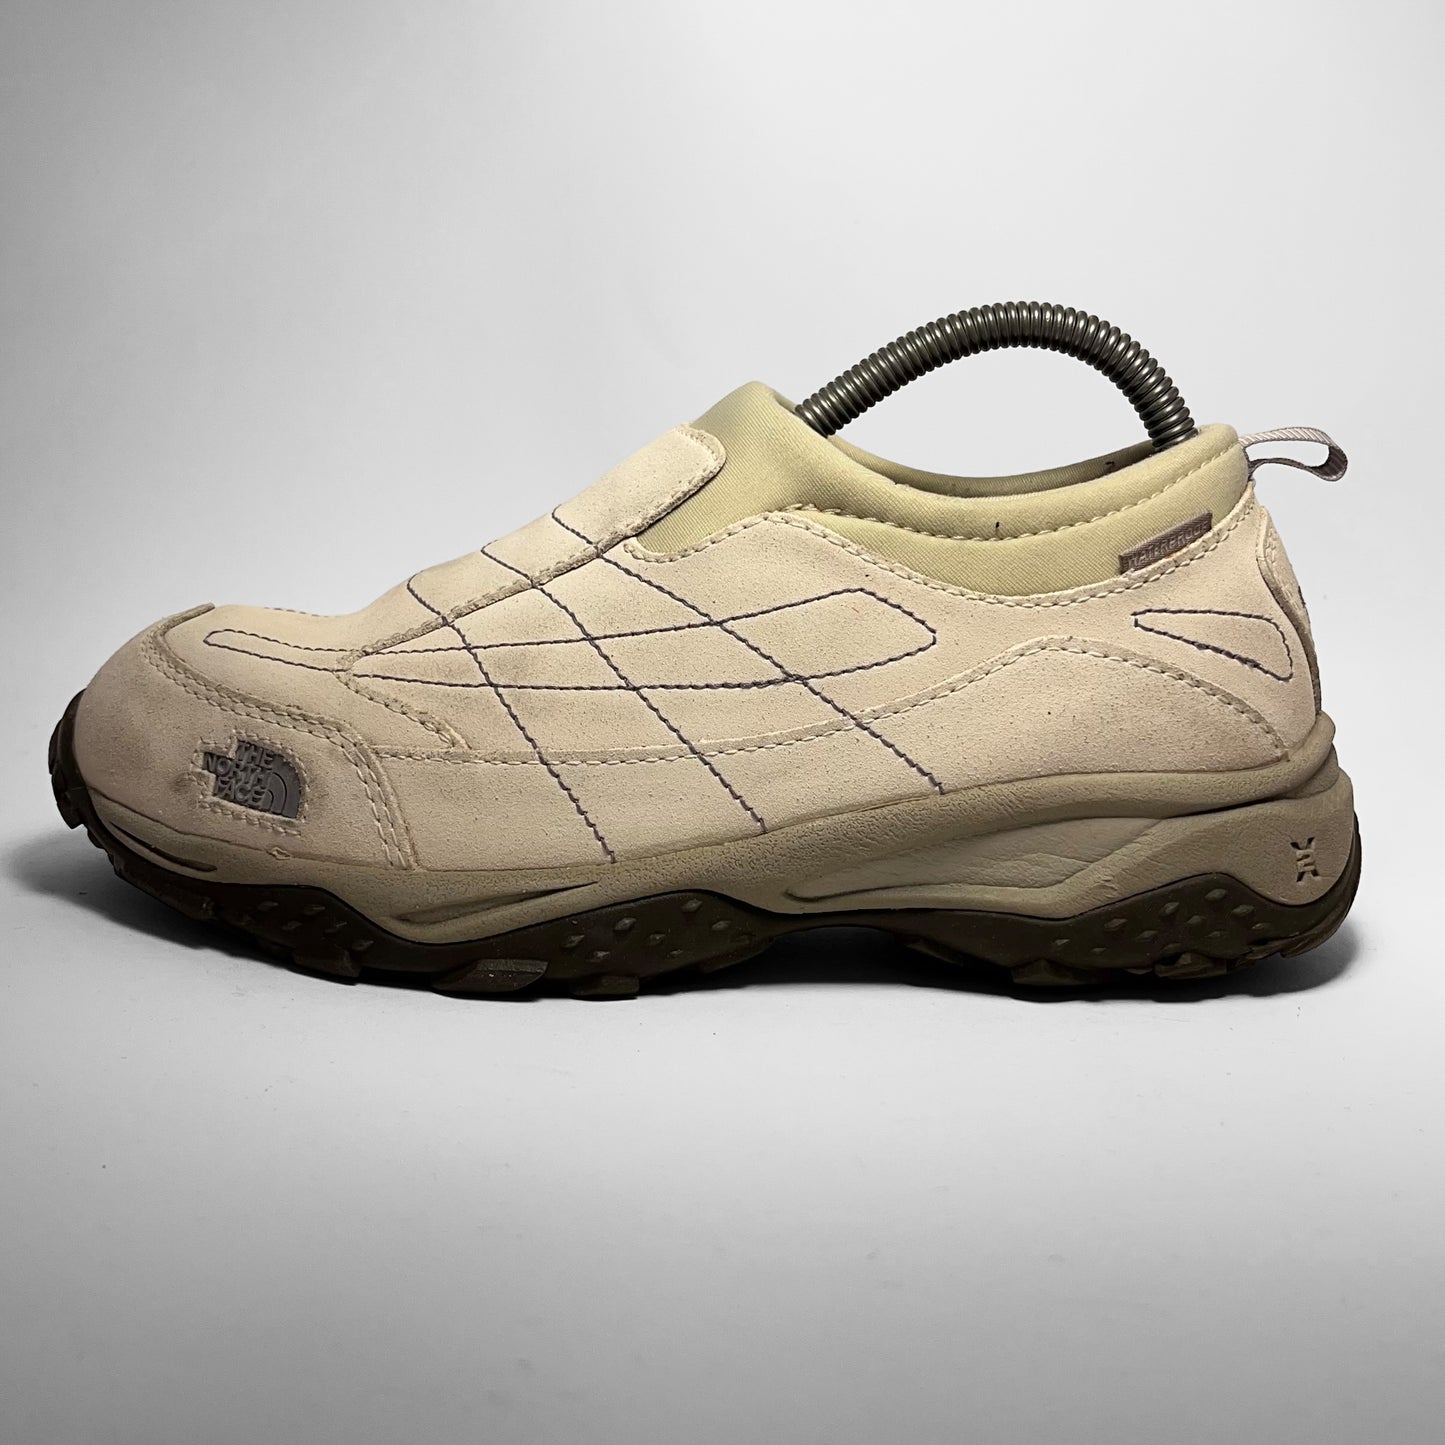 The North Face Pipe Dragon Clog (2000s)